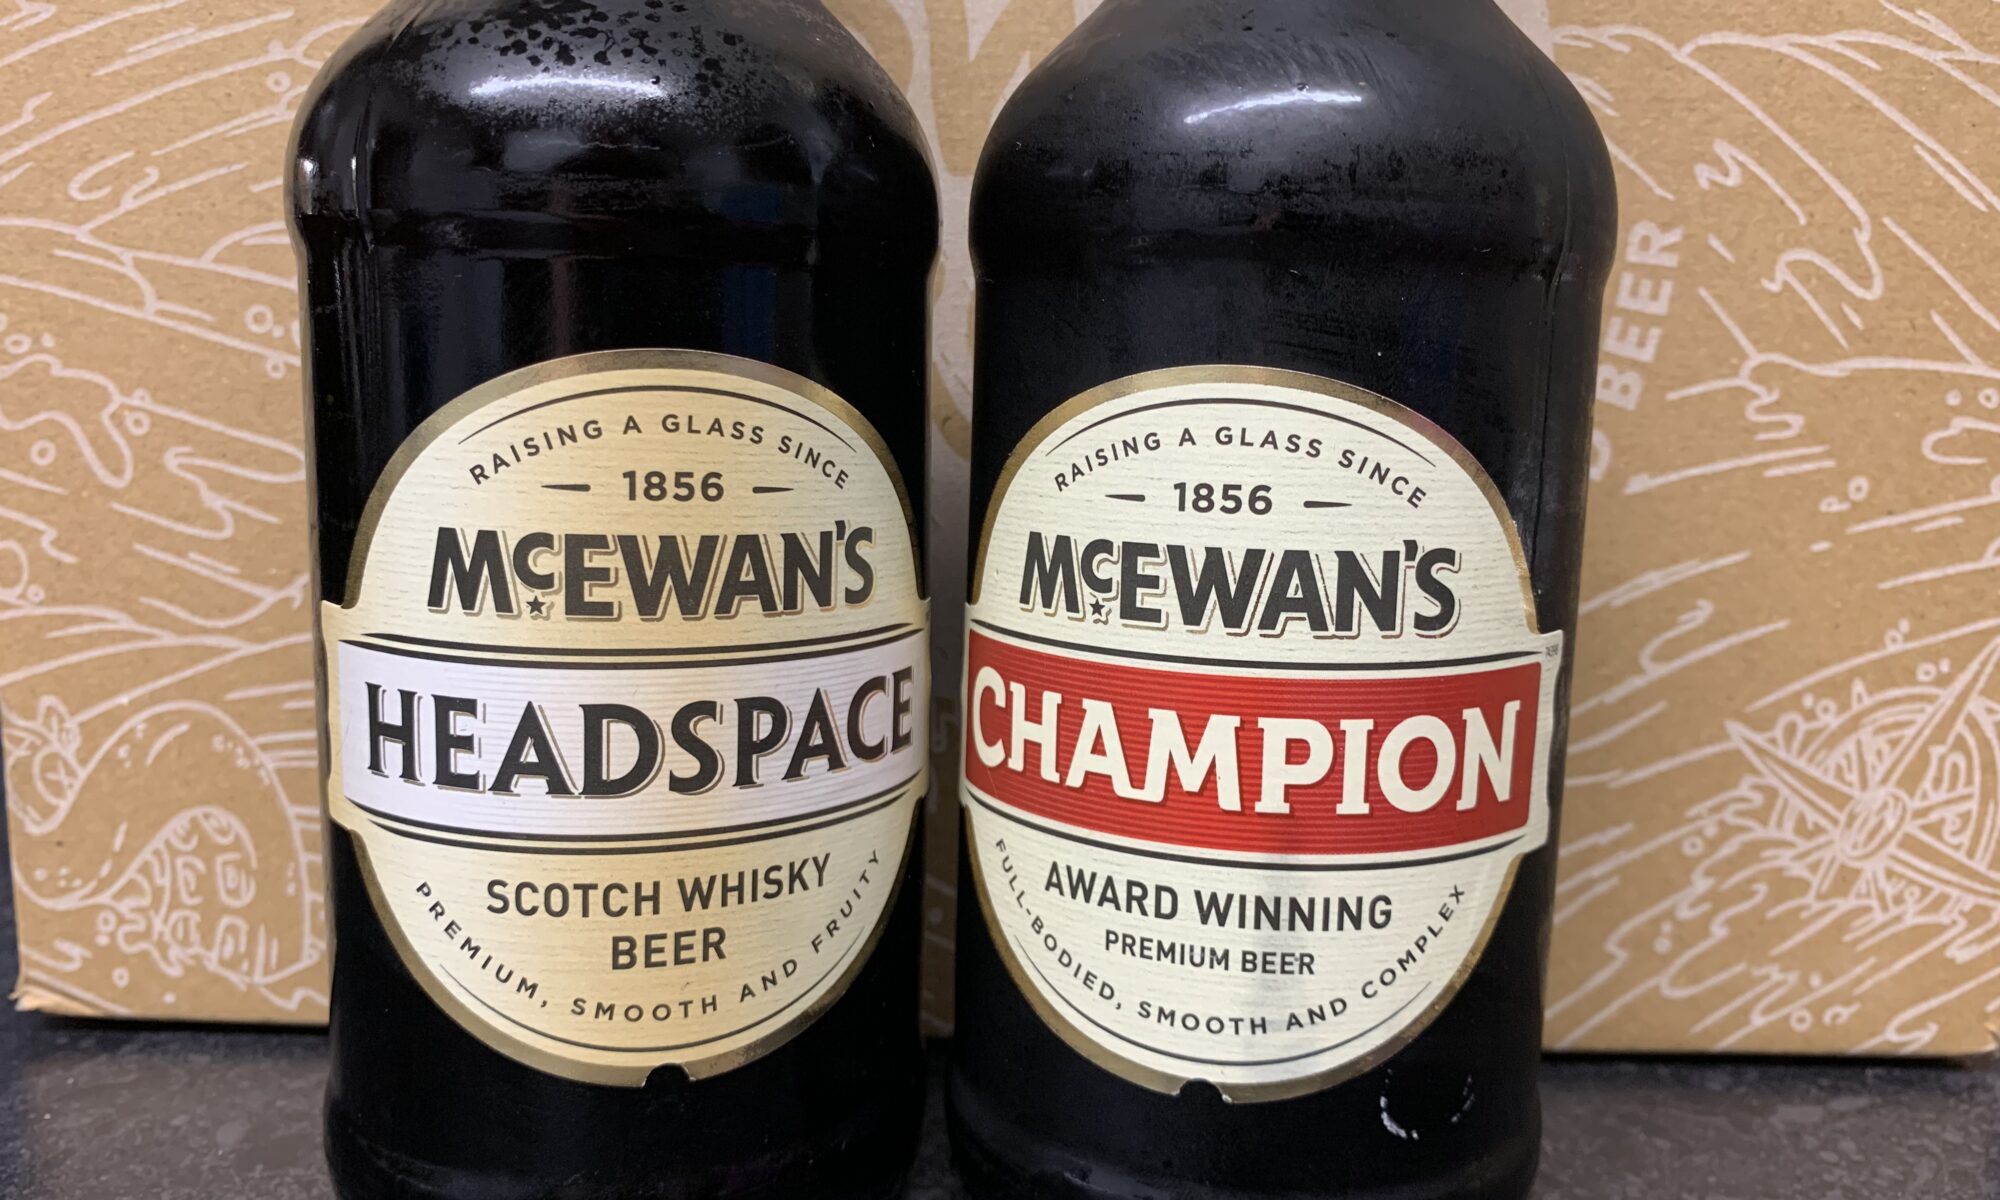 S3E1: McEwan's Headspace Scotch Whisky Beer and Champion Premium Beer – The Lager Logs: Pints of view with Tom and